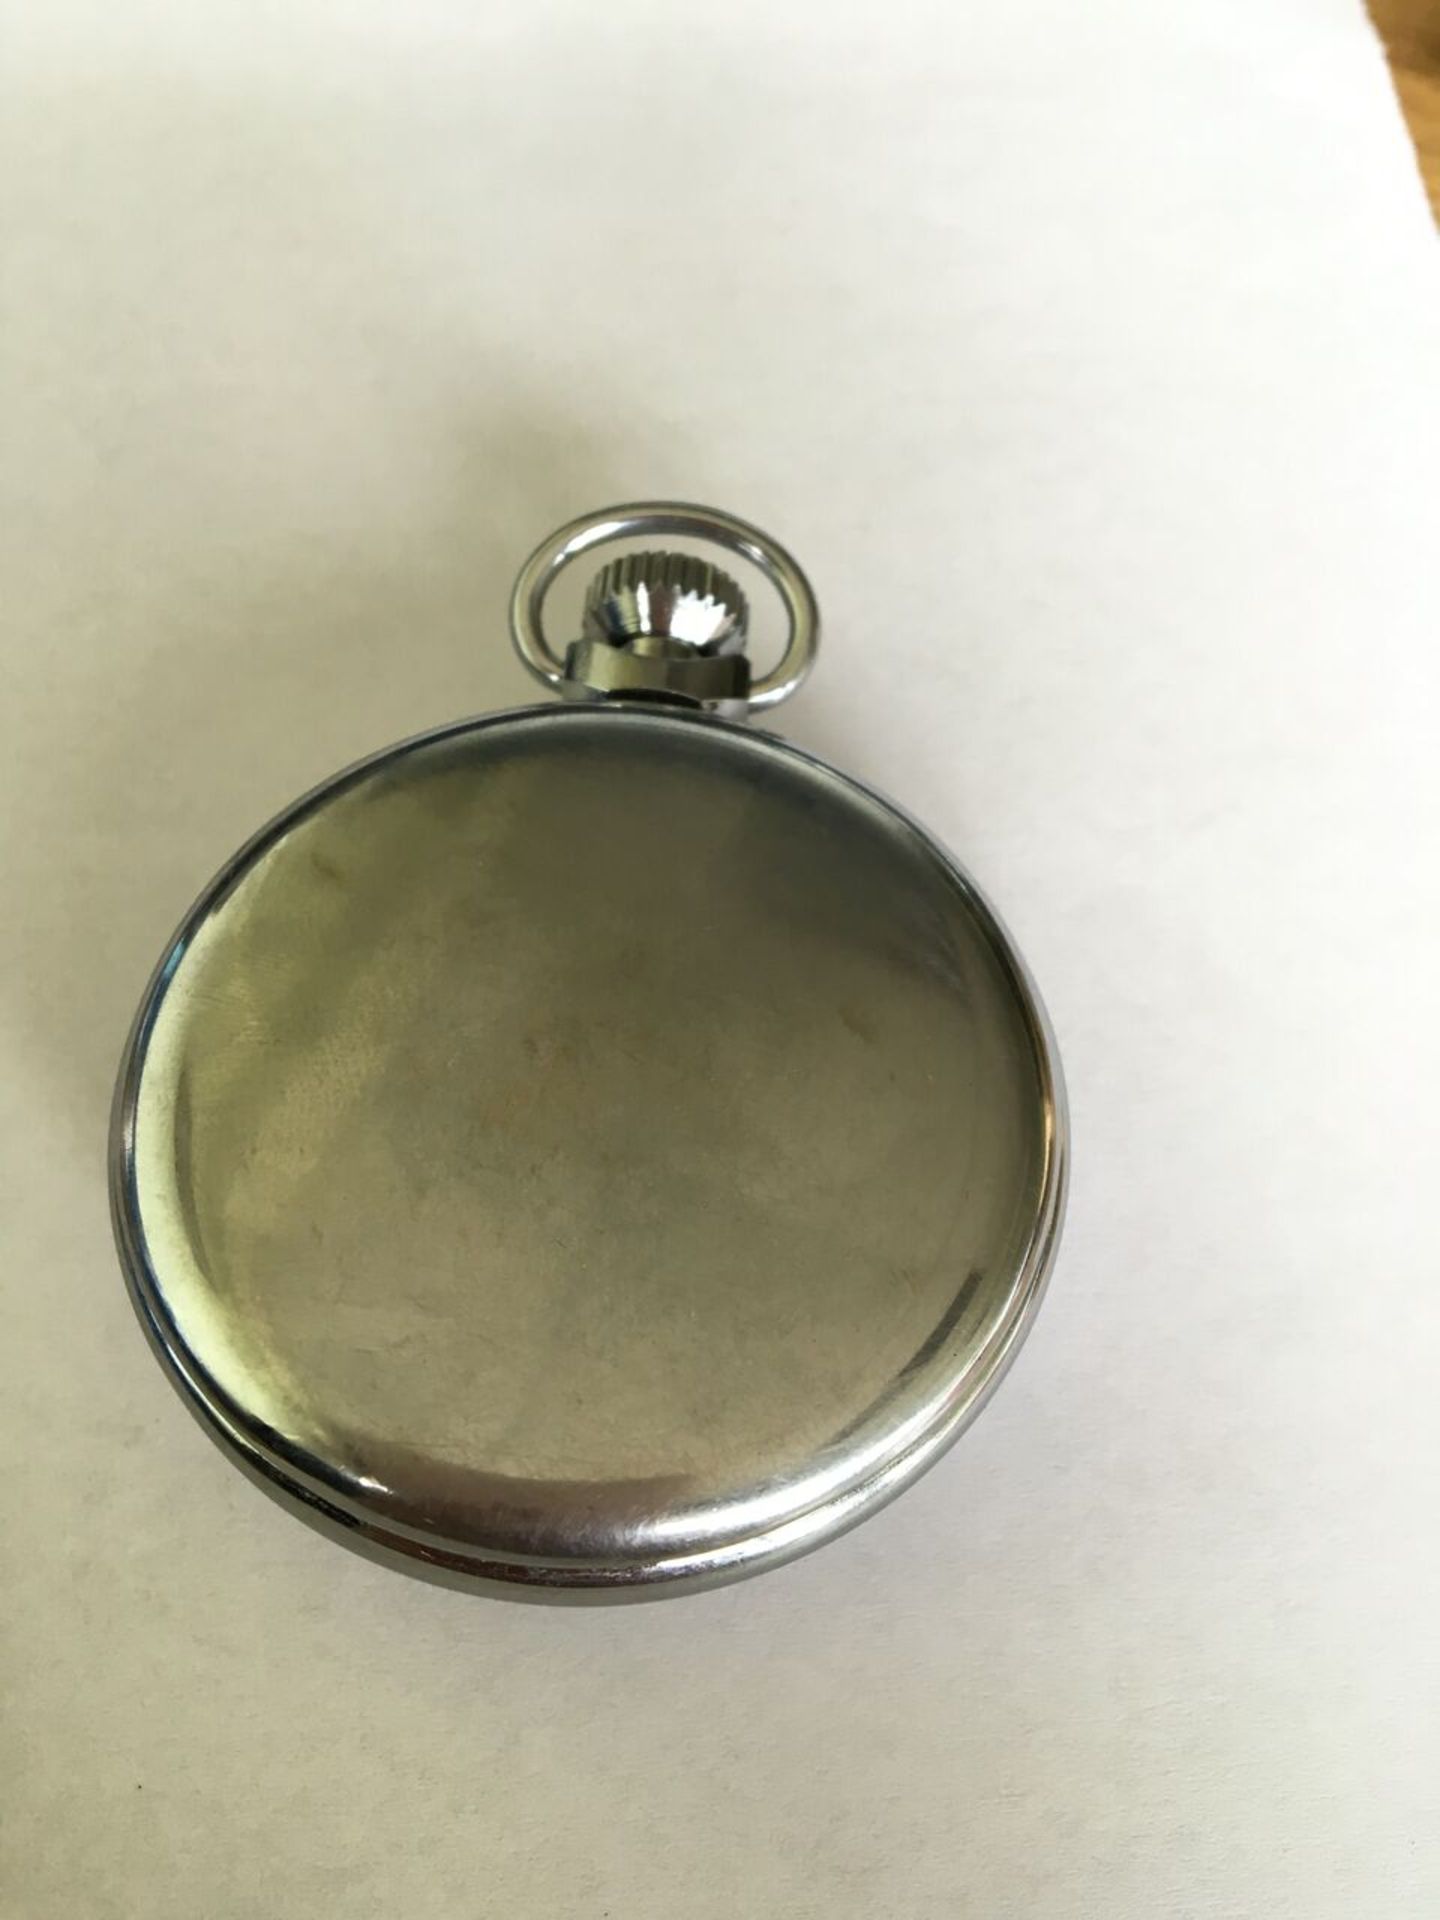 POCKET WATCH BY SMITHS IN CHROME CASE AND IN WORKING ORDER. FREE UK DELIVERY. NO VAT. - Image 2 of 3